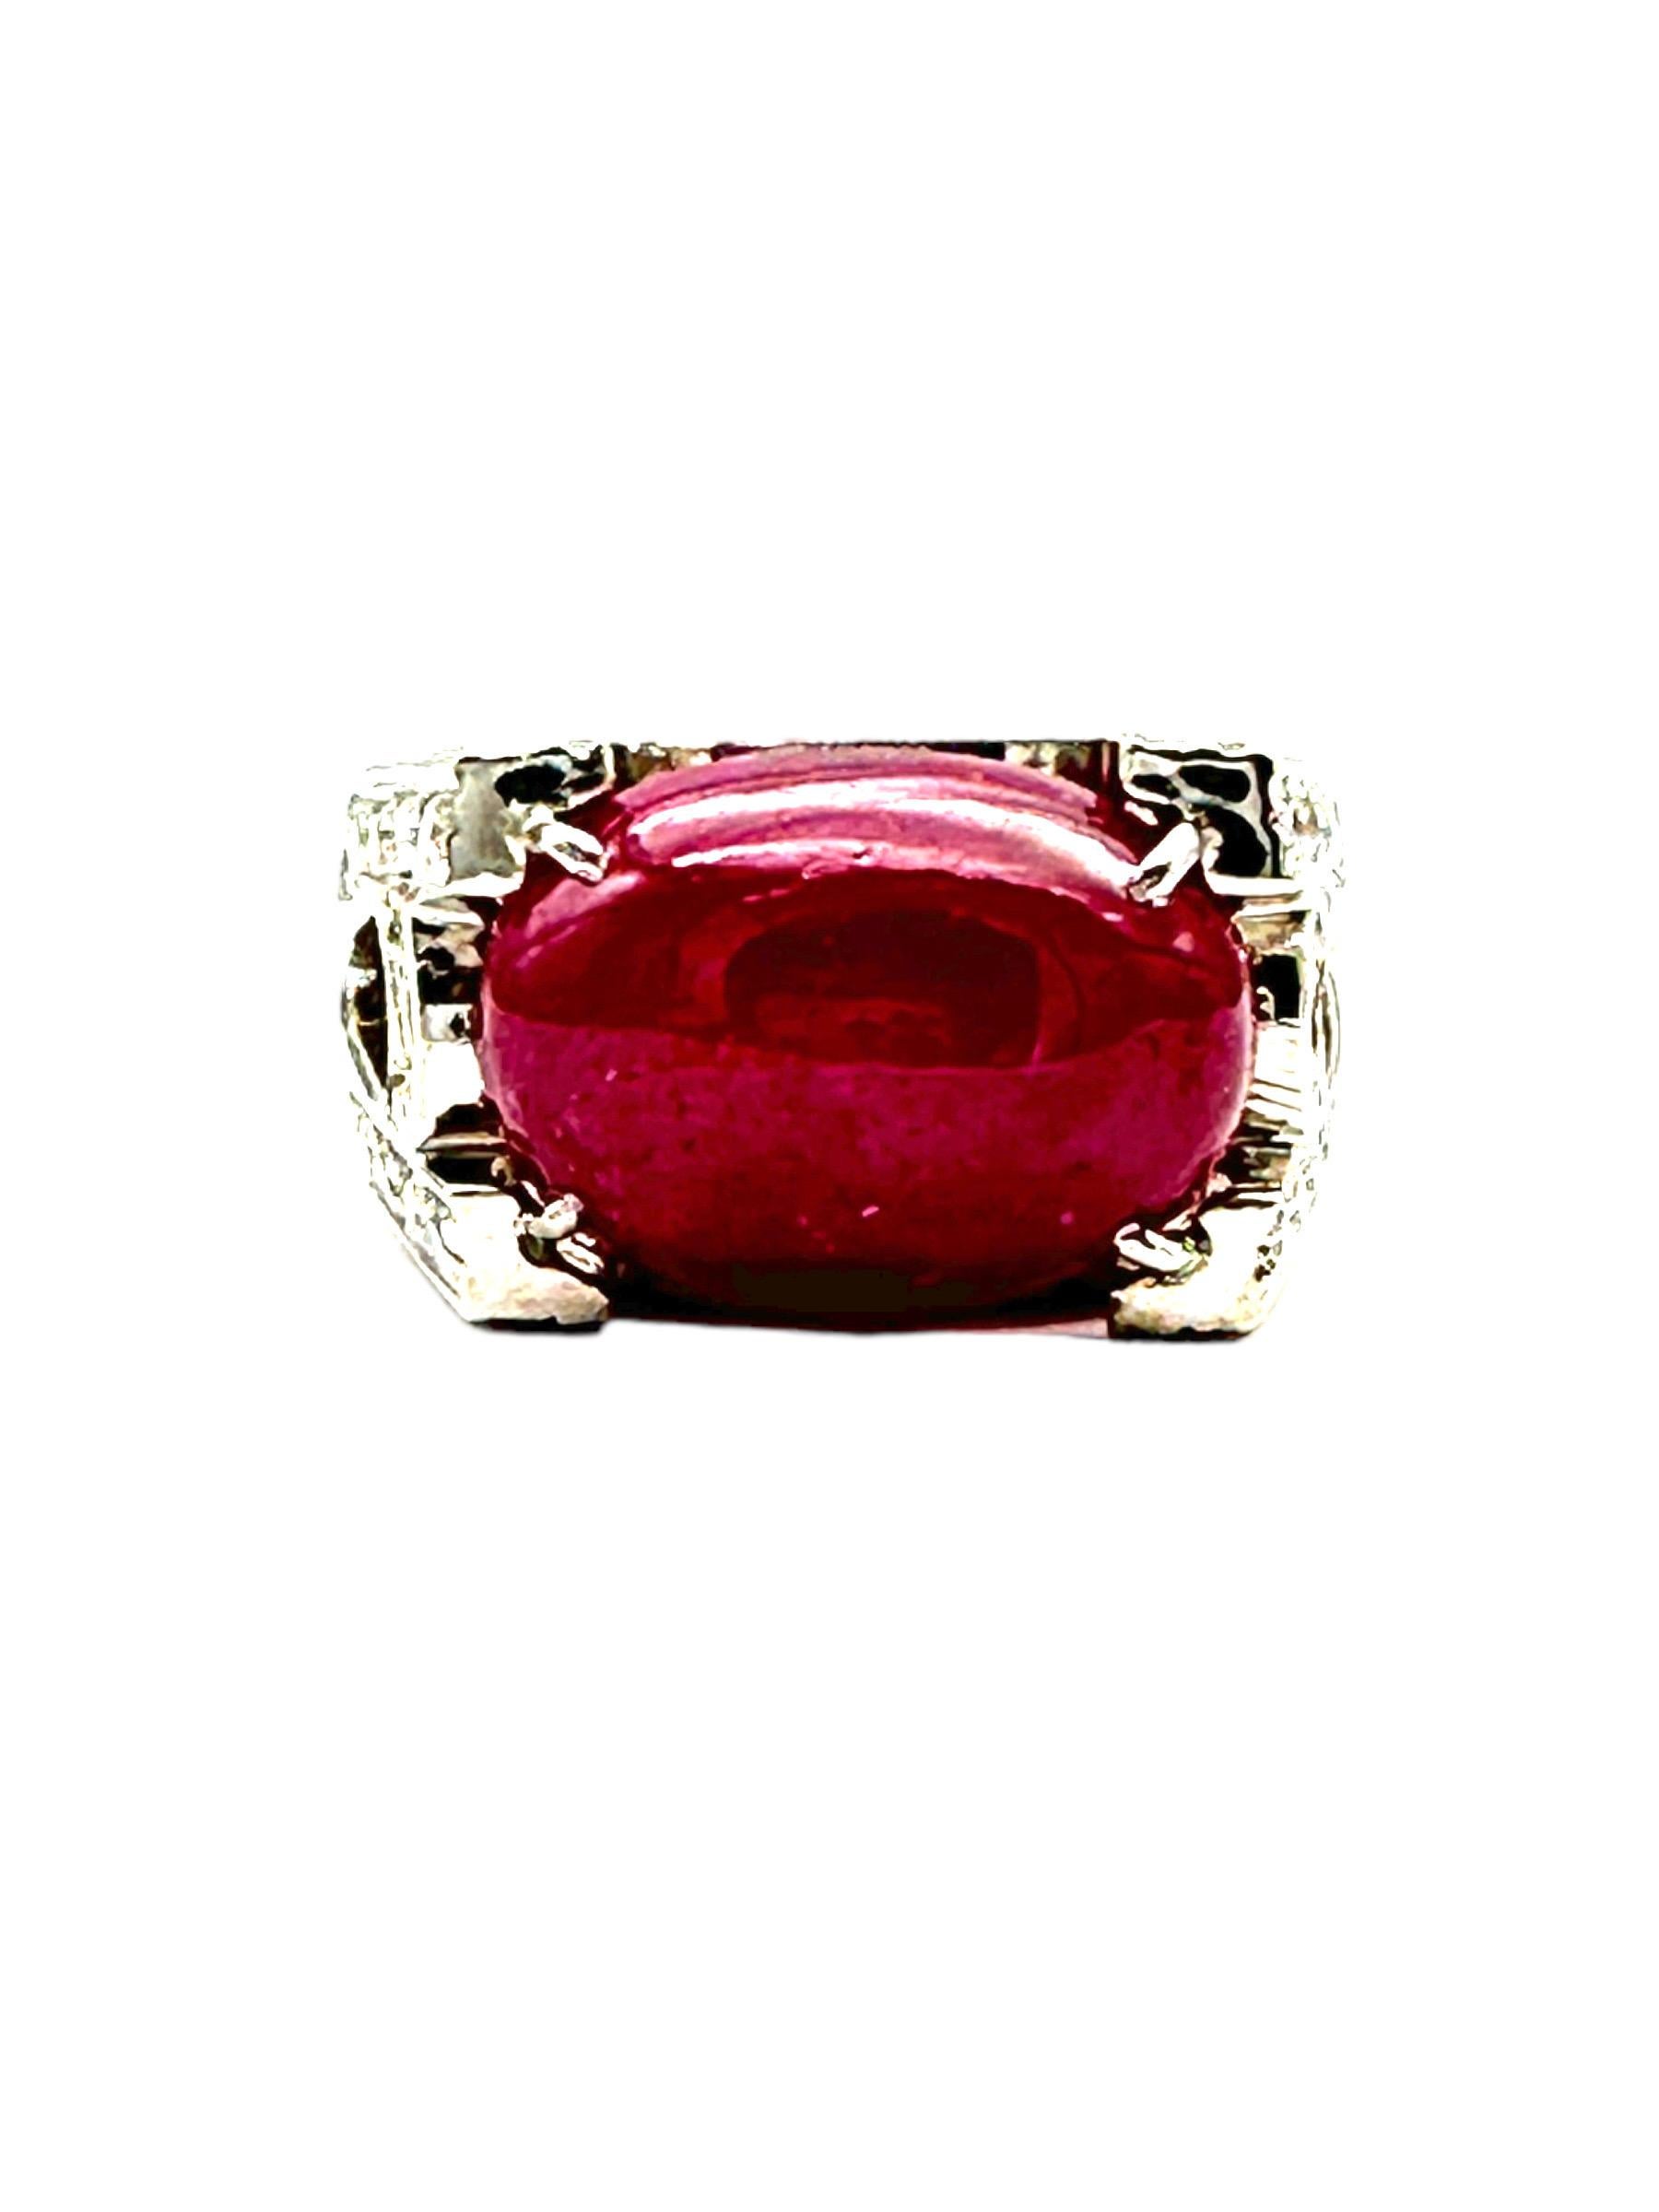 One 14-karat white gold ring consisting of Fifty-two round brilliant diamonds is set in a wide 11.50 mm ring featuring a center red ruby gemstone.This ruby pave set diamond ring makes a stunning statement with its nearly, 1.50 ct of shining